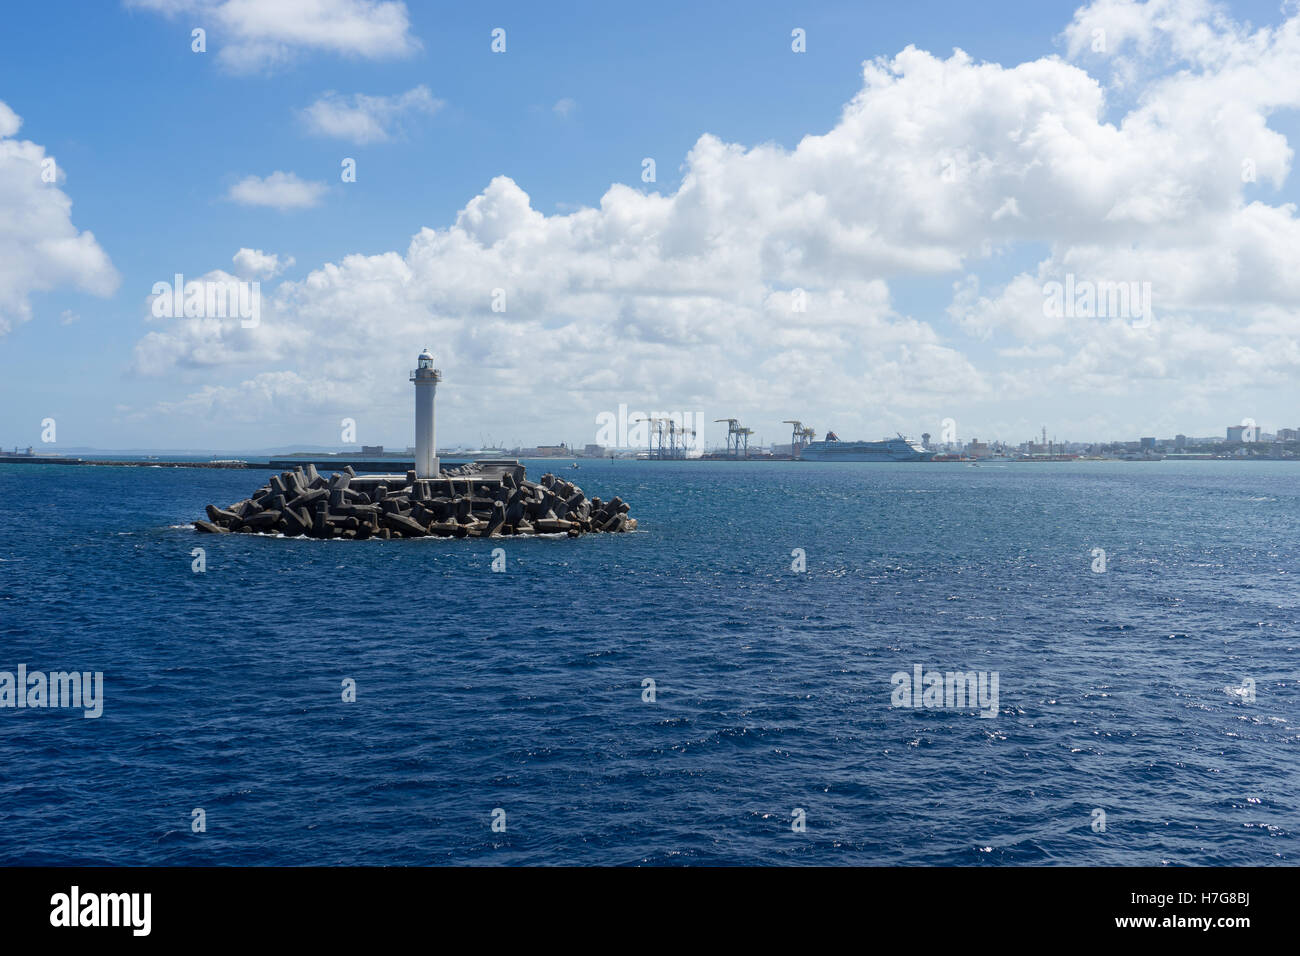 Lighthouse on a sea defence platform in Okinawa Stock Photo